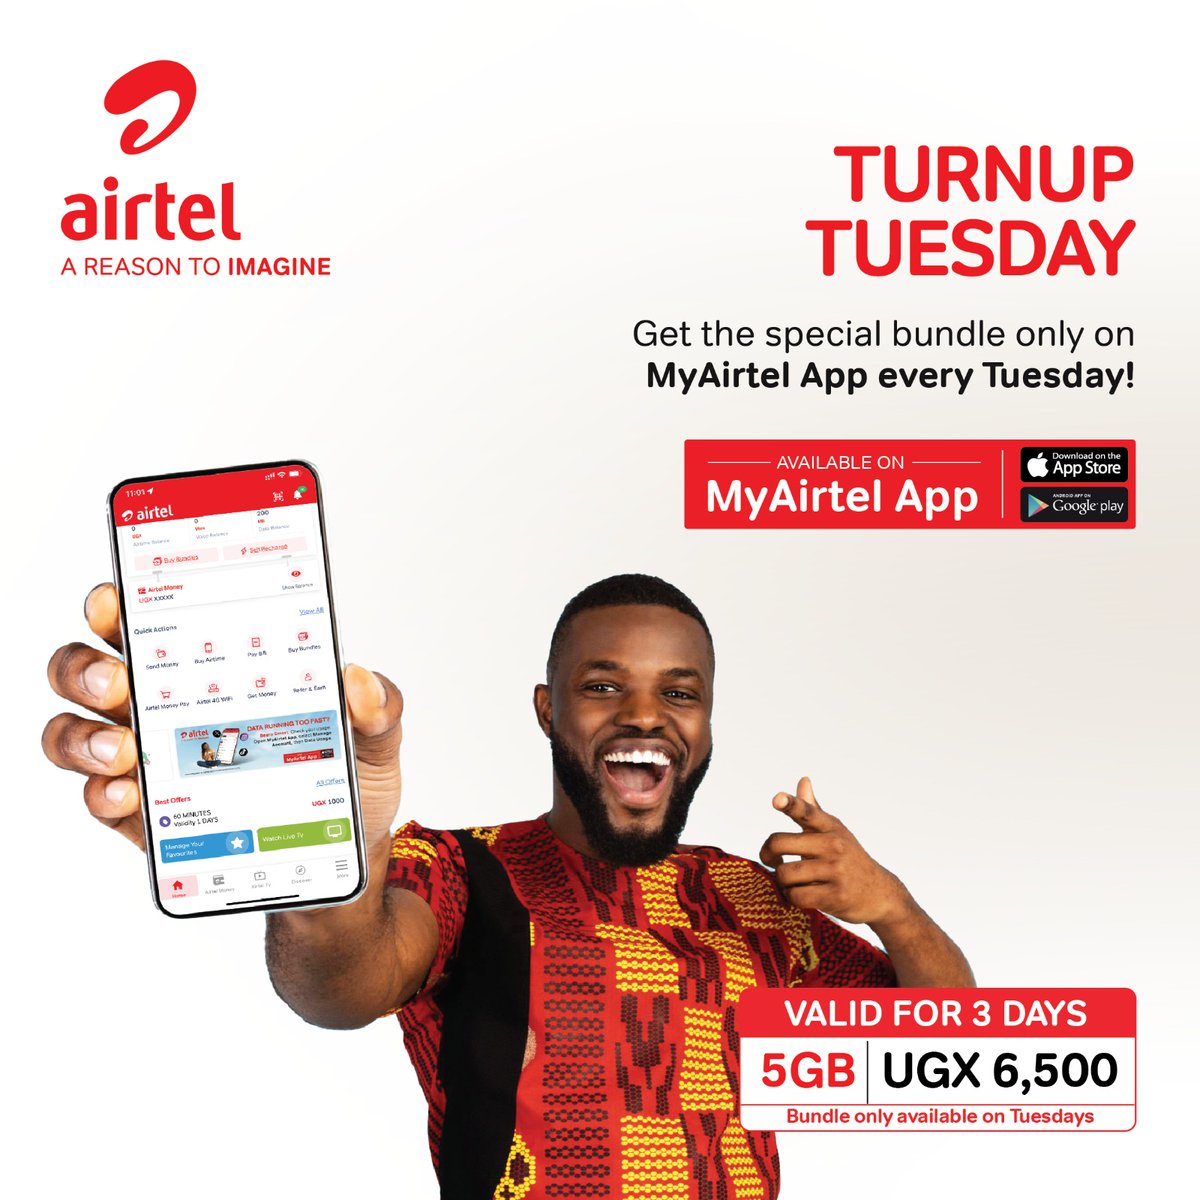 Download #MyAirtelApp to activate 5GB at only 6500 valid for three days. 
#TurnUpTuesday